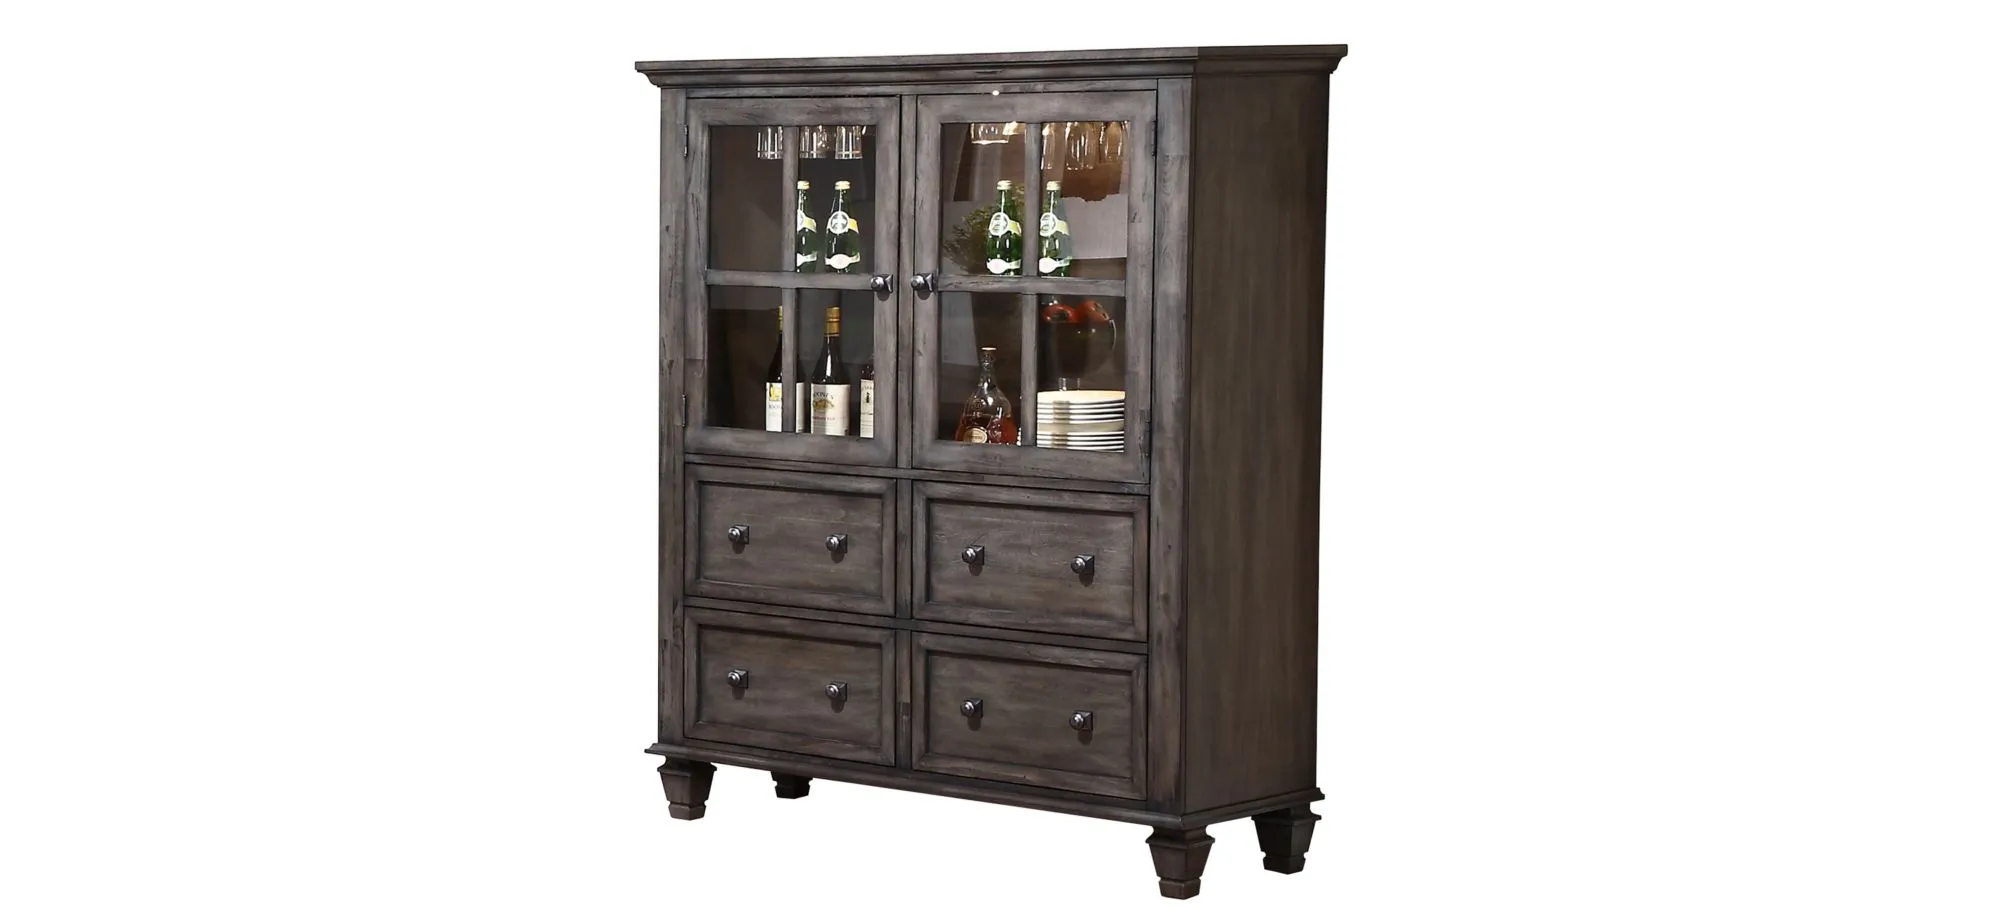 Eastlane China Cabinet in Weathered Gray by Sunset Trading